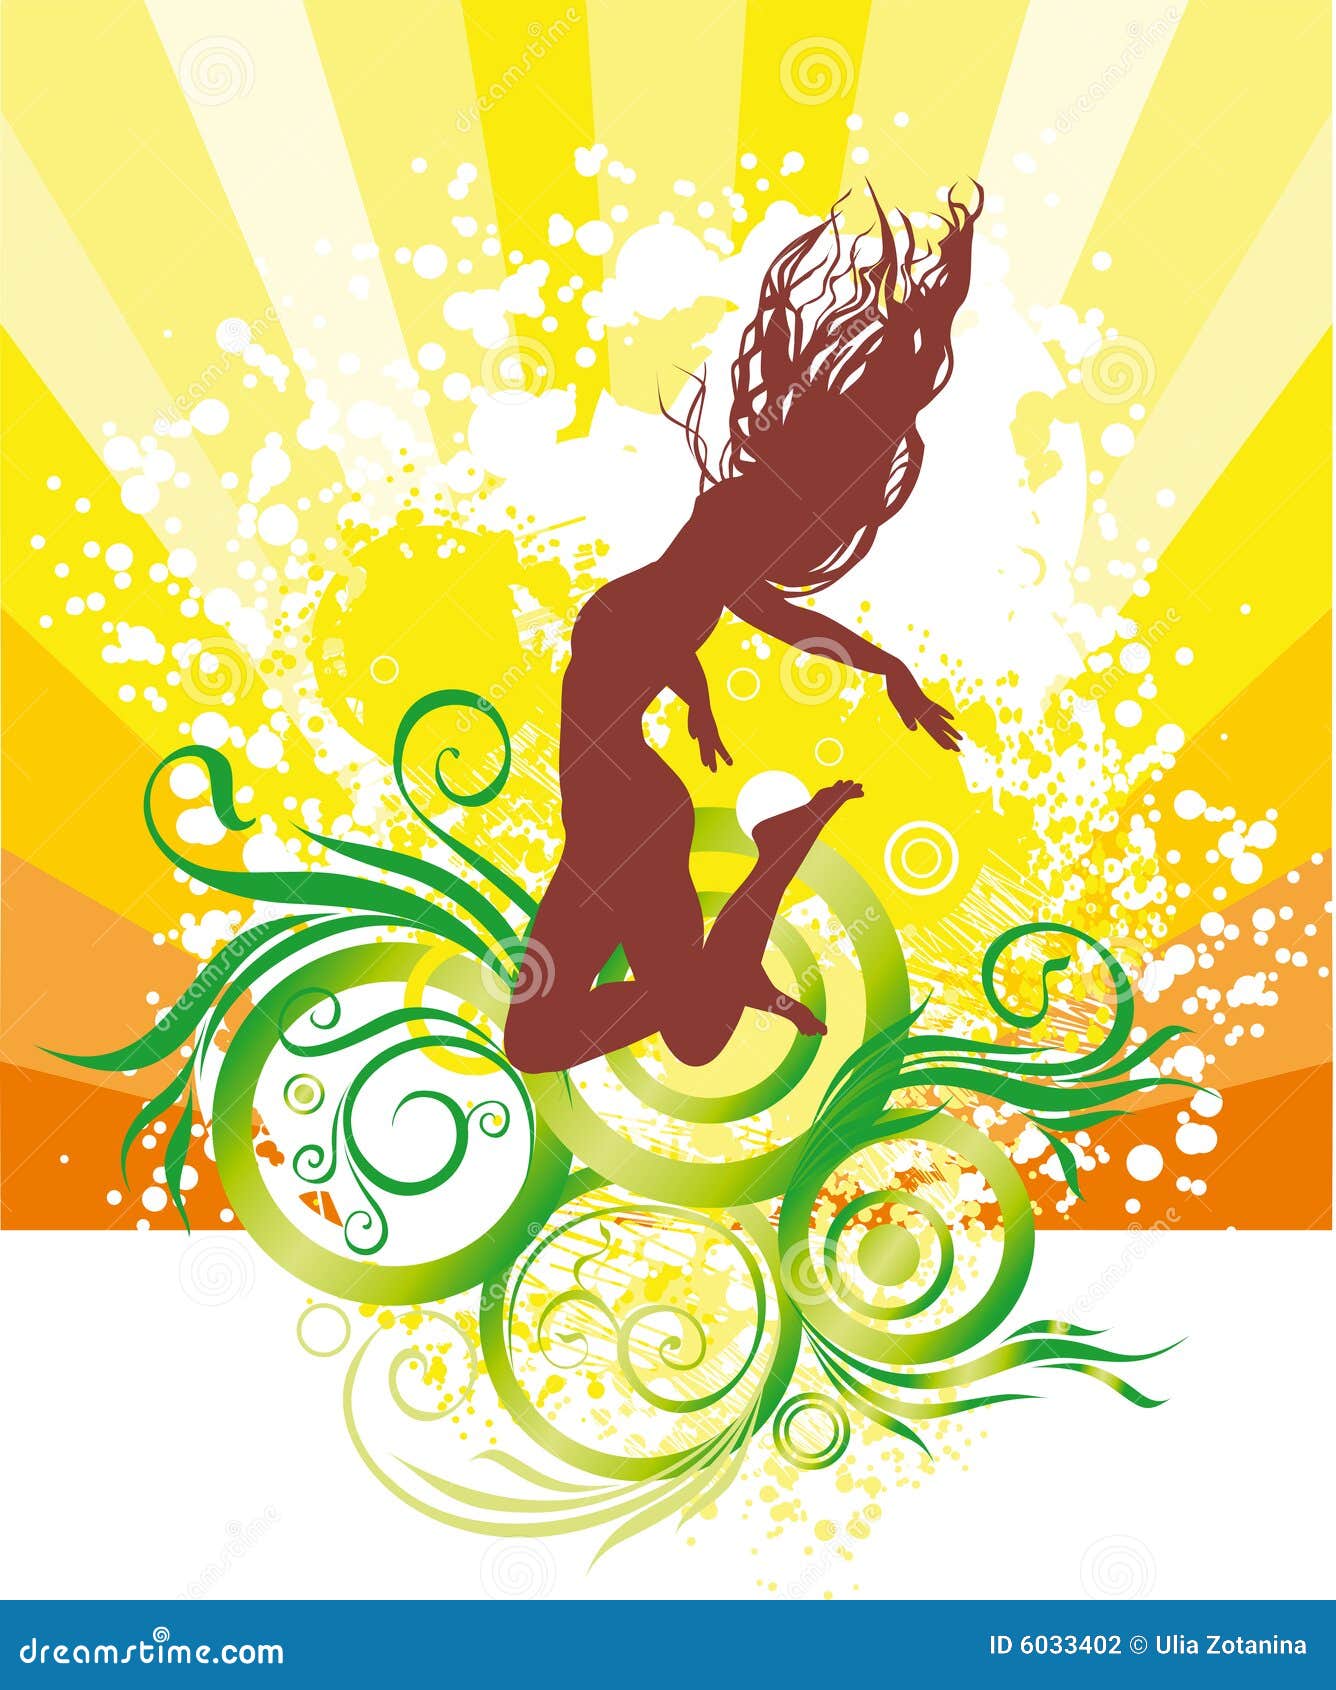 The girl stock vector. Illustration of action, spring - 6033402